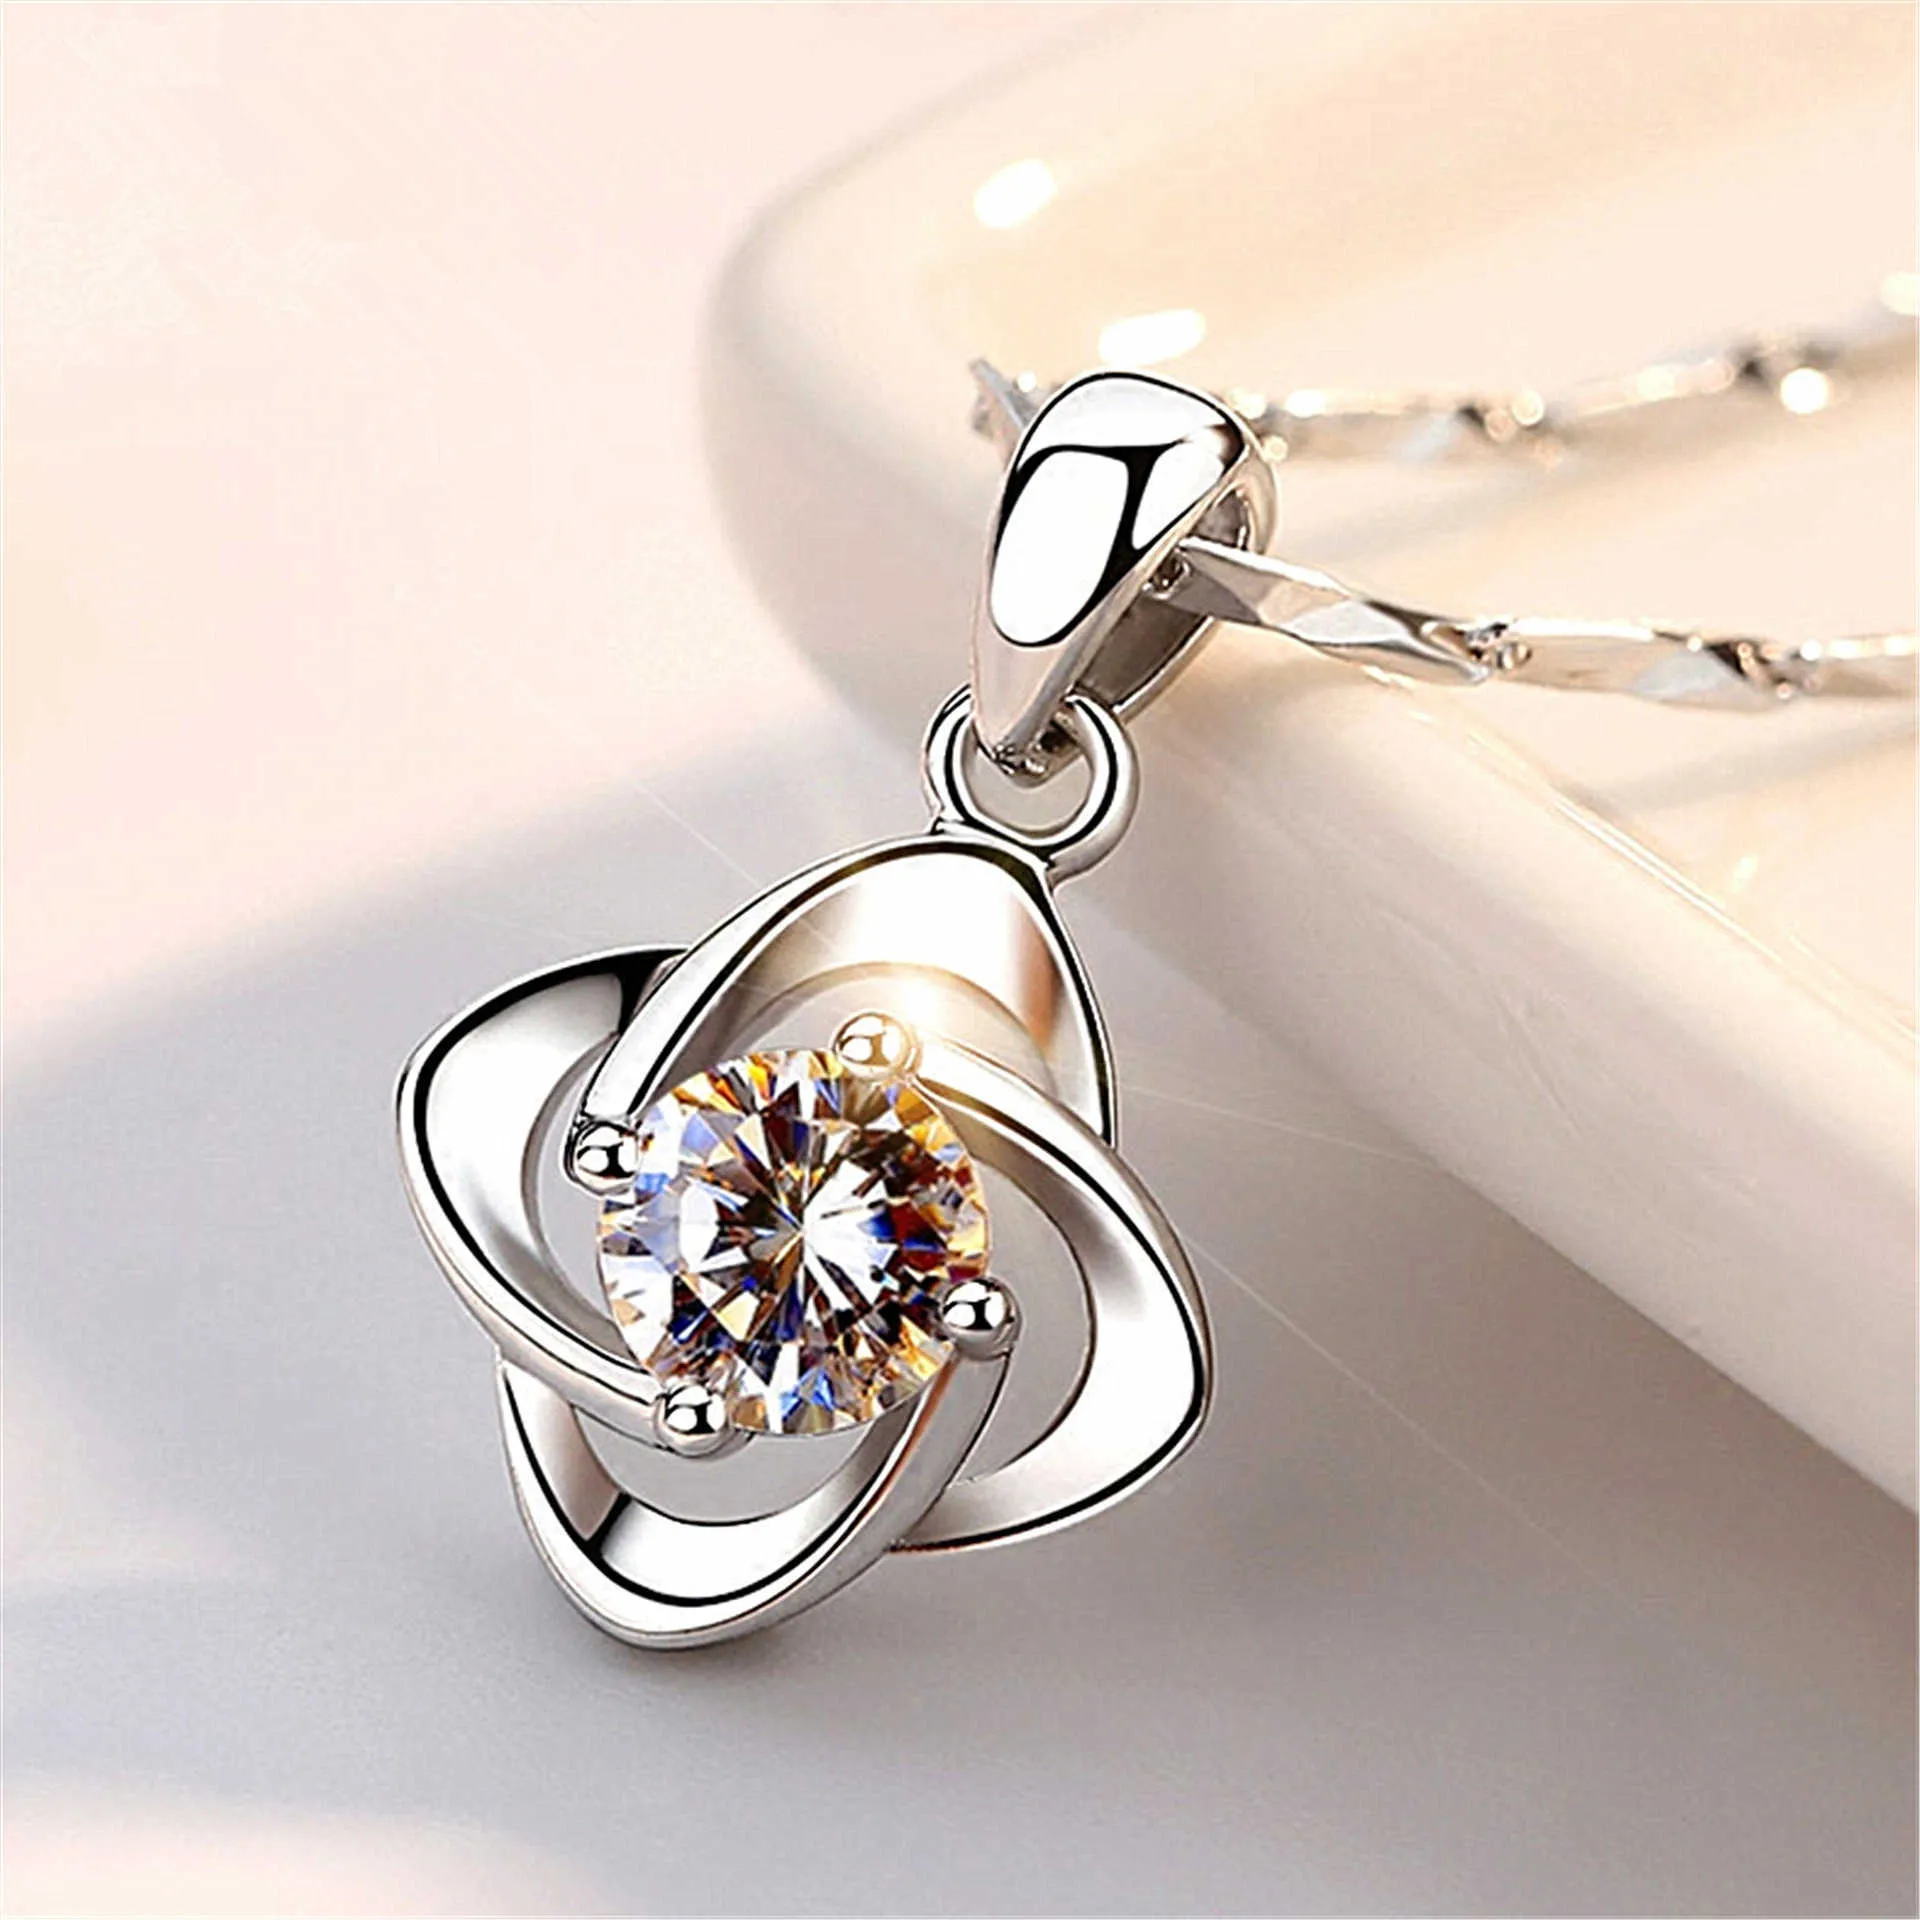 Crystal Womens Necklaces Pendant New Women's grass Fashion new simple clavicle Chain gold Silver Plated